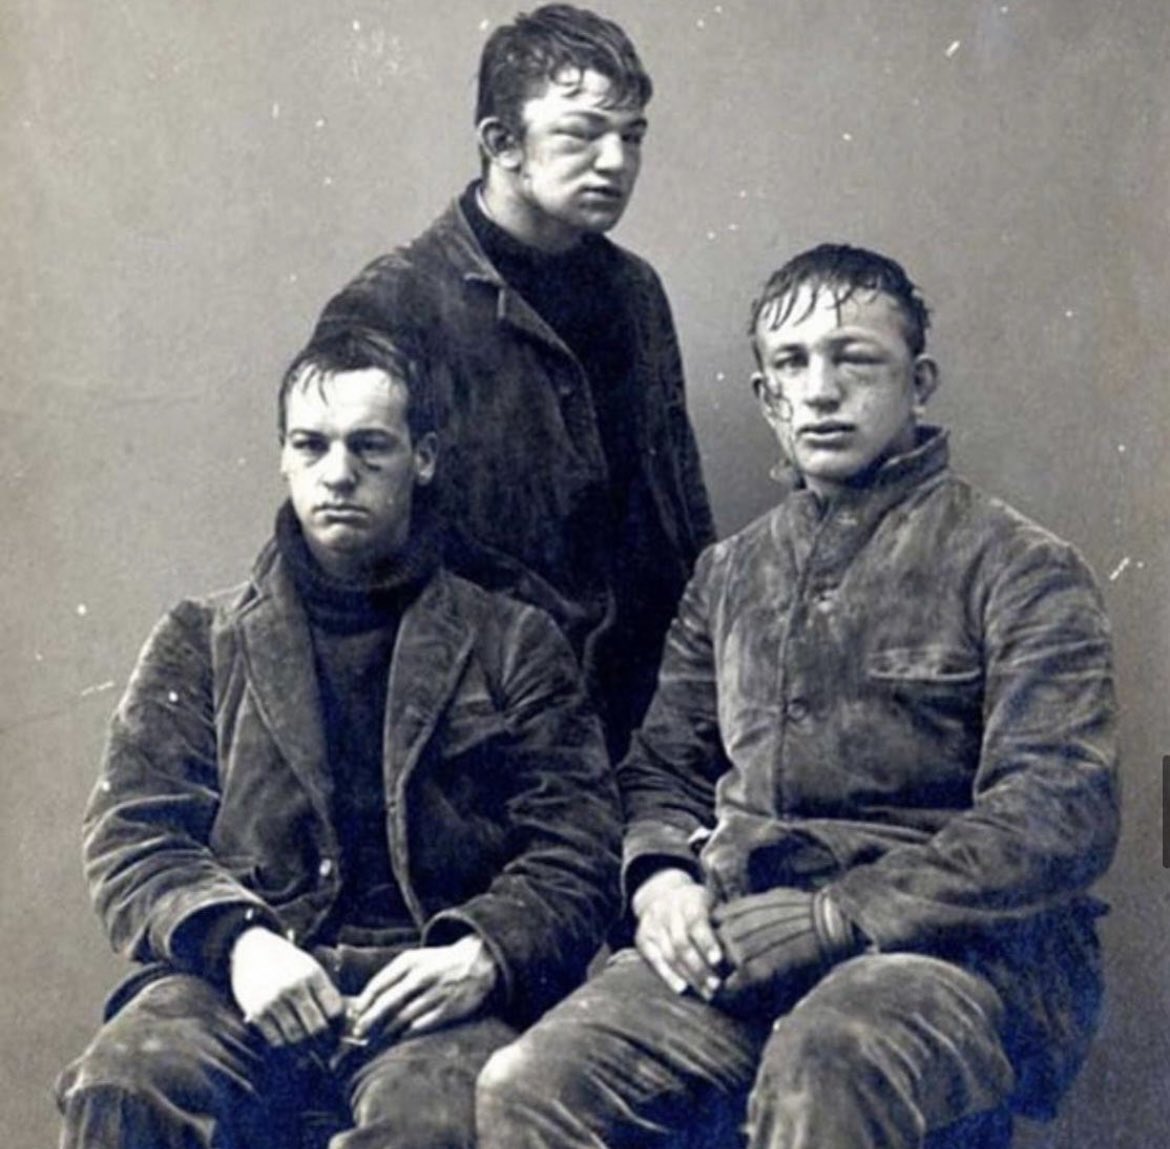 Princeton sophomores after a brutal snowball fight in 1893.